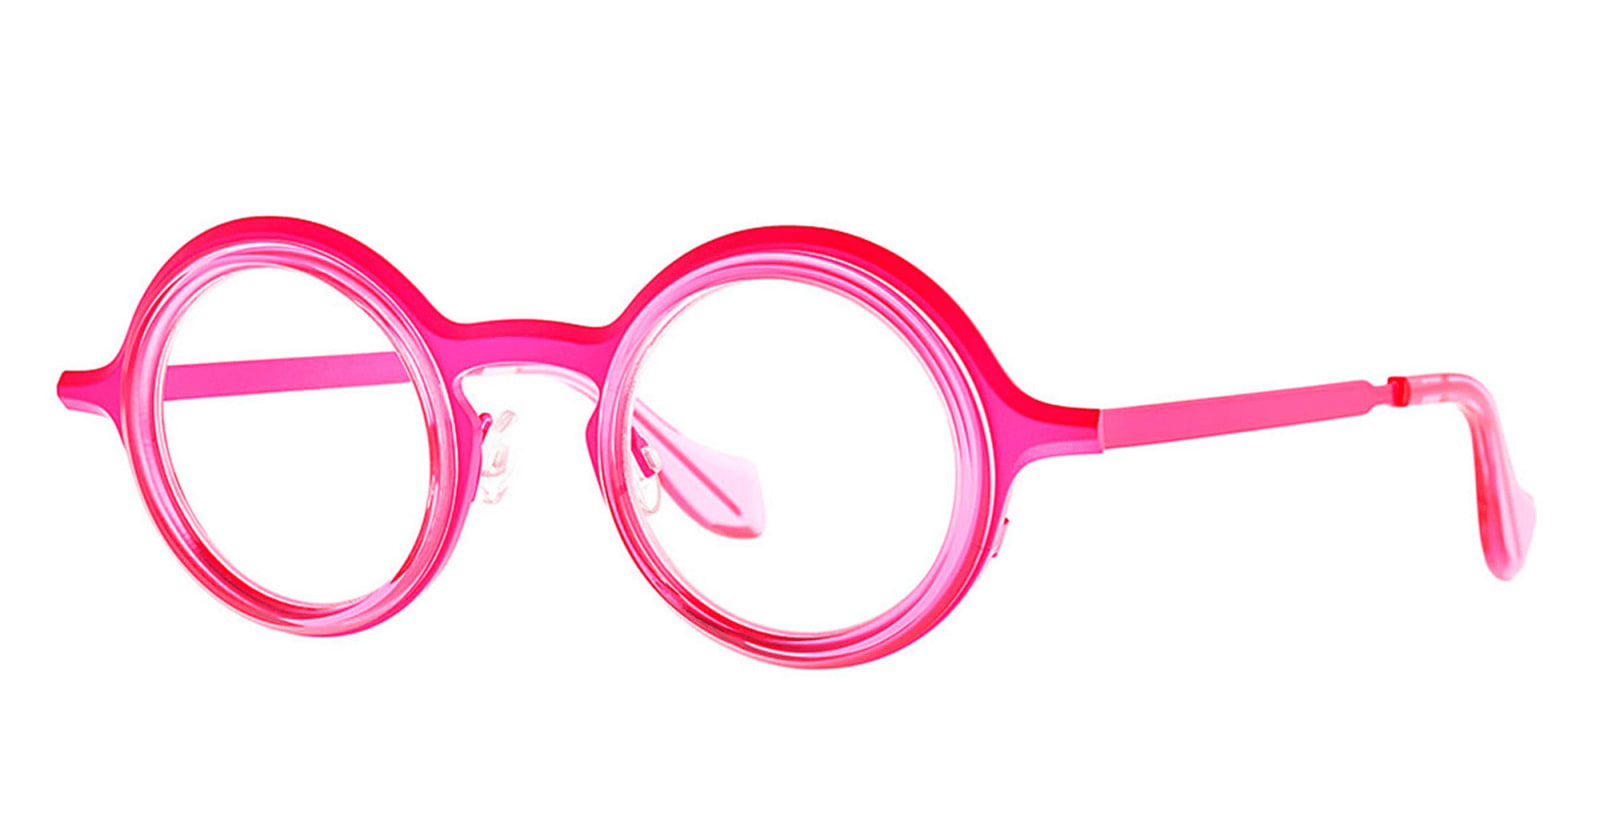 THEO EYEWEAR CABOCHON - 013 FLUO PINK RX GLASSES